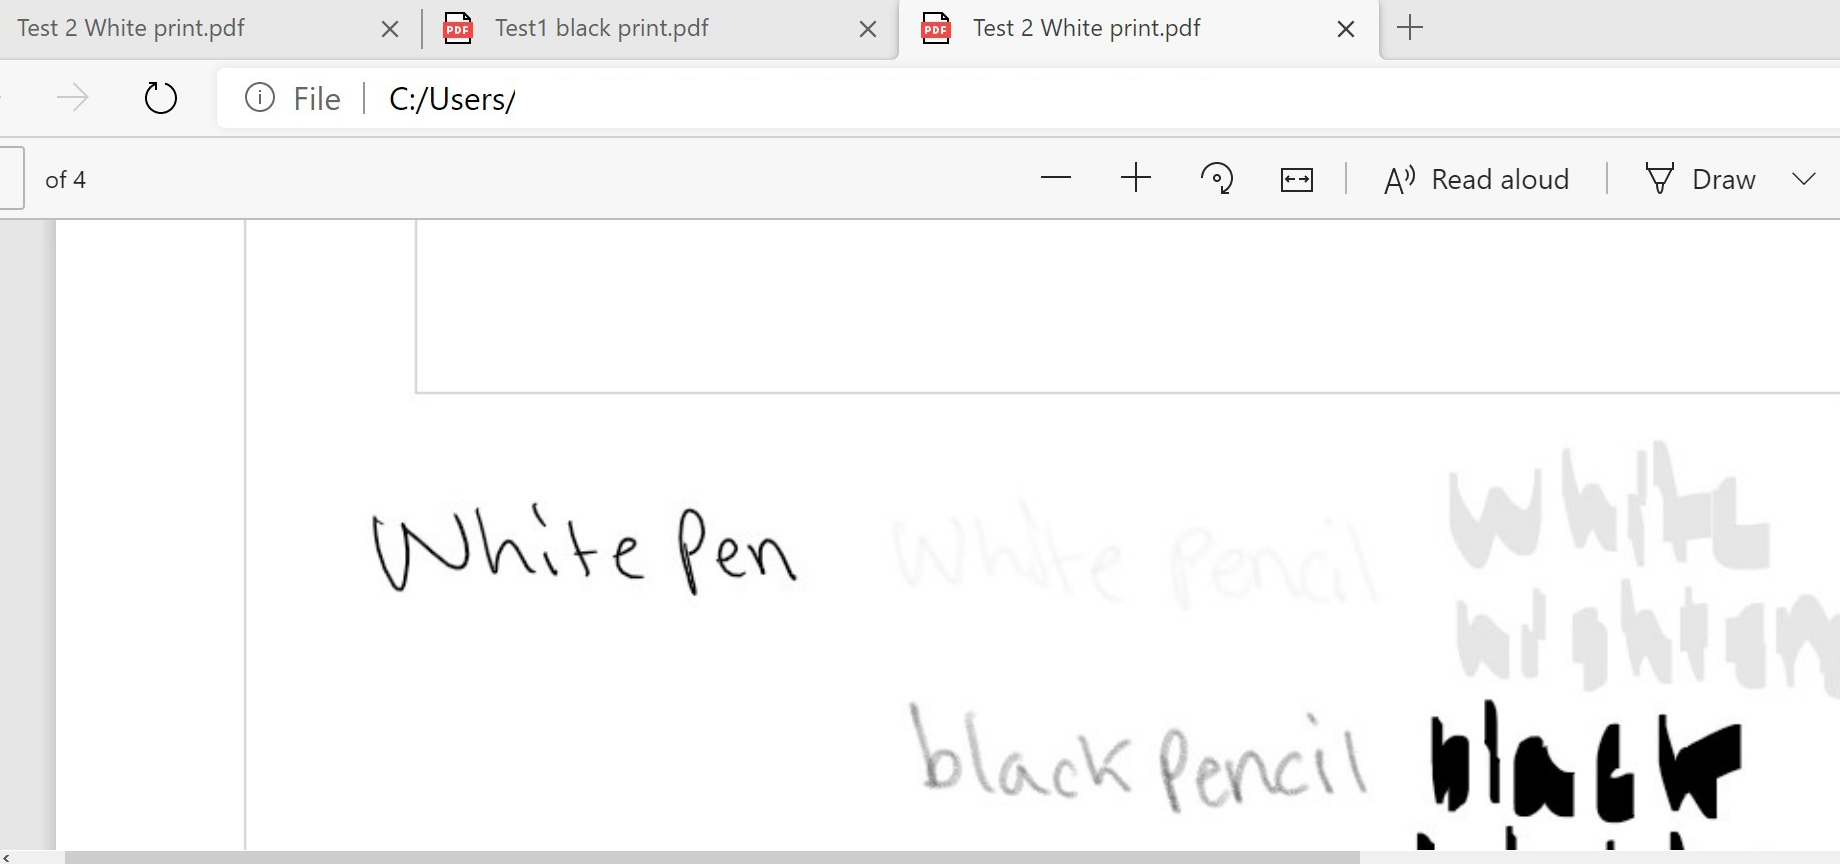 OneNote for Windows 10 Drawing in black ink prints as white, white